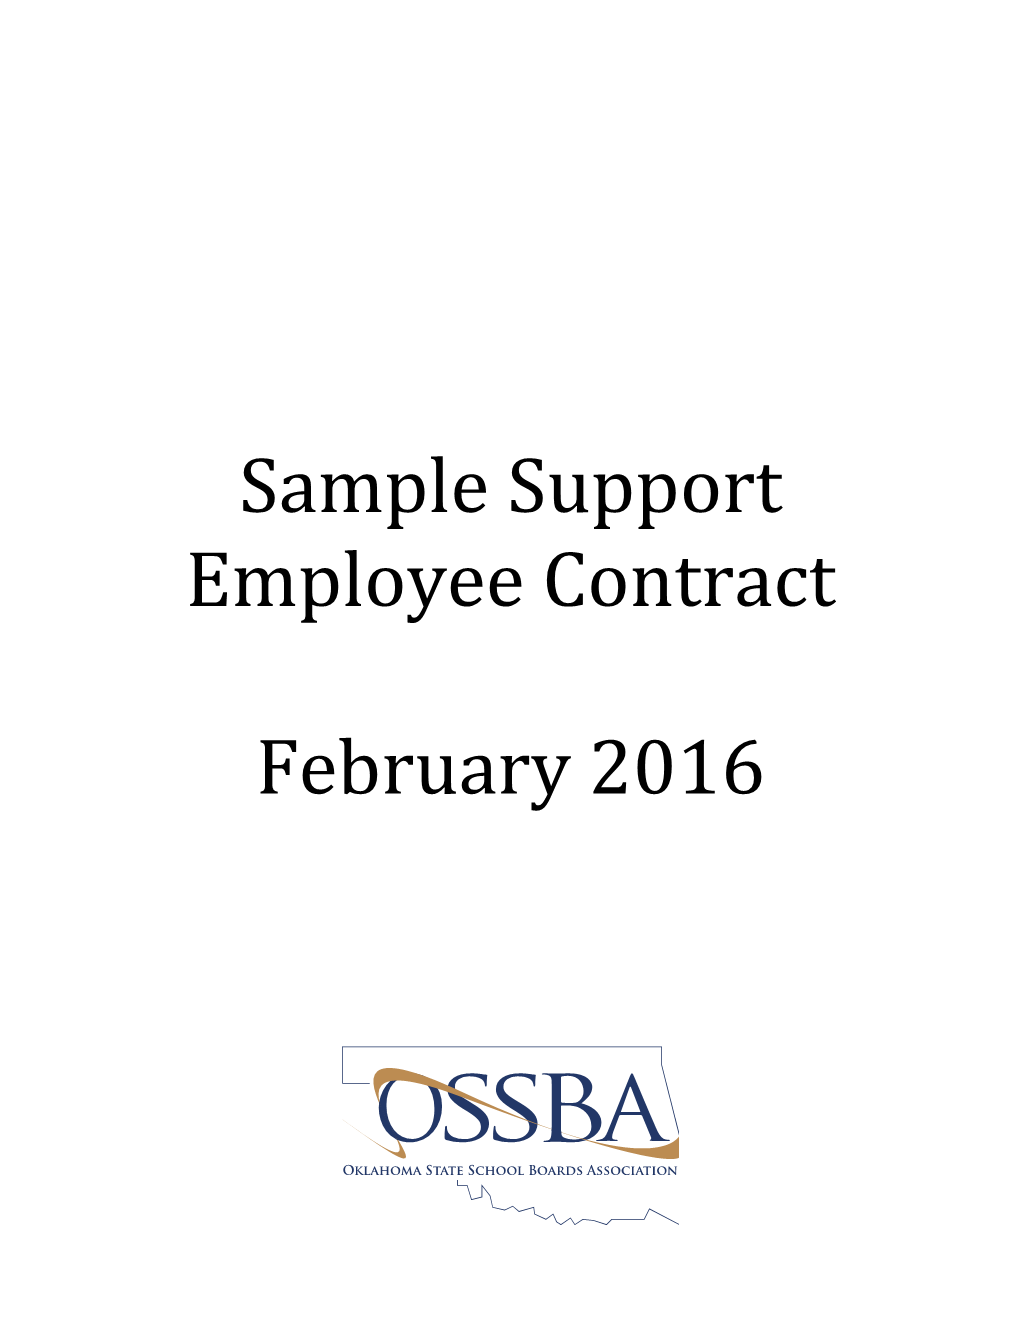 Sample Support Employee Contract